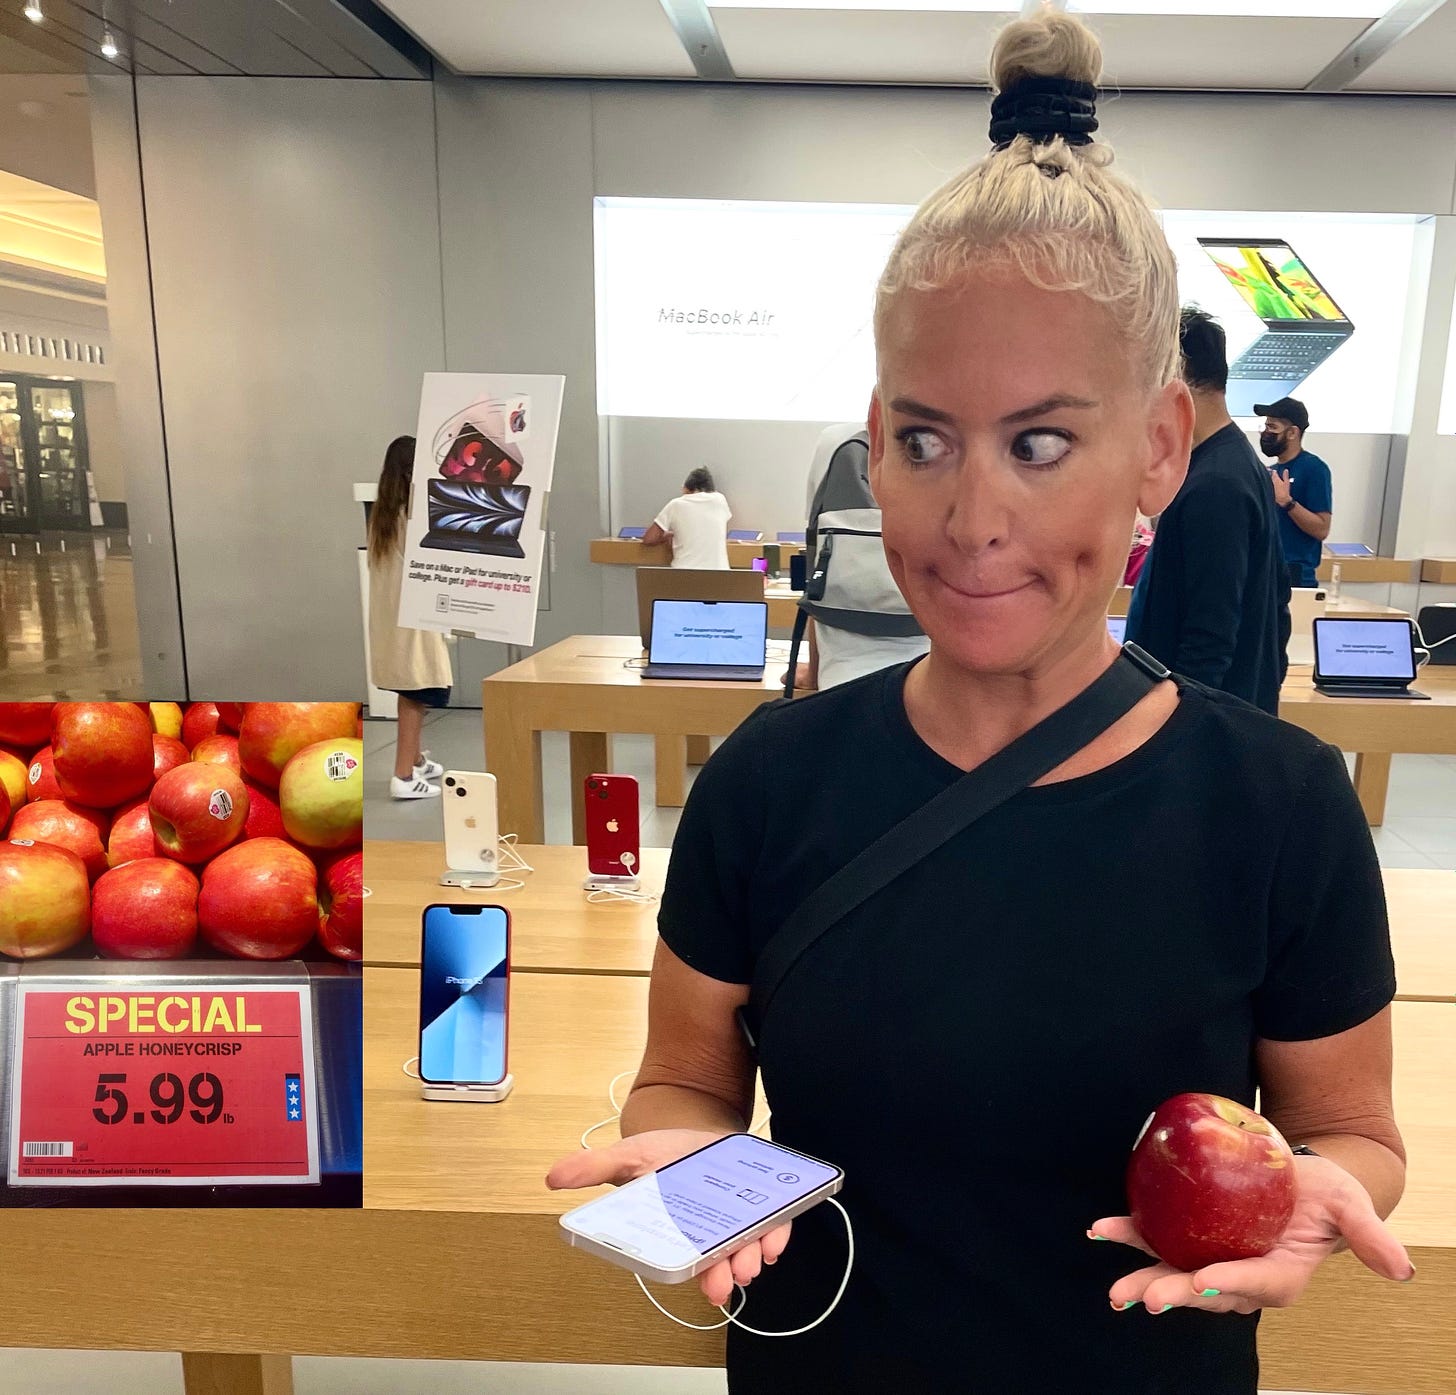 Dahlia Kurtz pictured in an Apple Store. Holding an apple in one hand and iPhone in the other. And she says, "Got a sneak peek of Apple's new iPhone 14. Gotta say, it's kinda expensive for my blood. At $5.99/lb, I expect it to connect to the Internet."